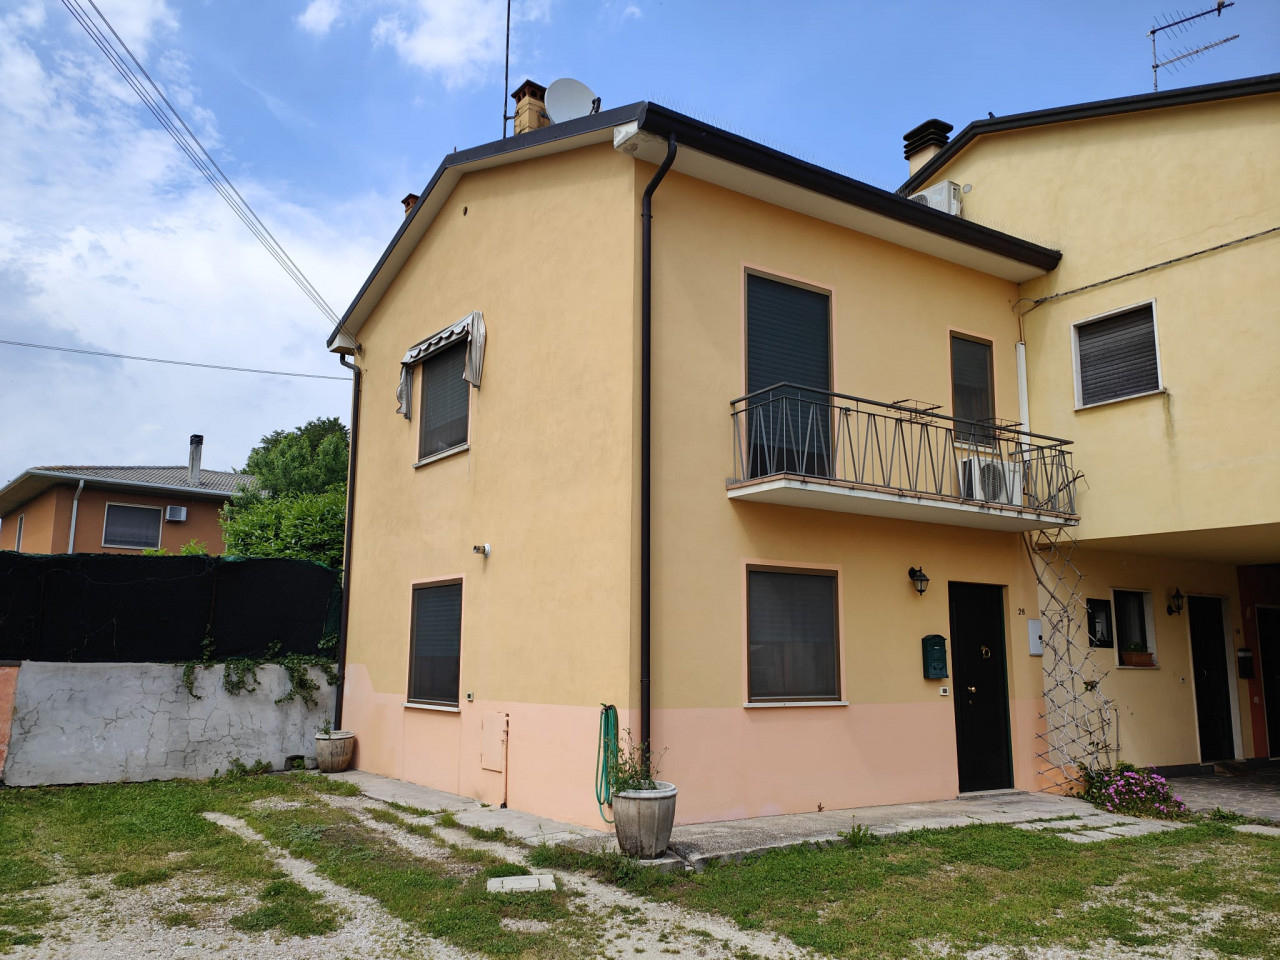 CALDOGNO INDIPENDENT 2 BEDROOMS WITH 2 BATHROOMS CAR PARKING